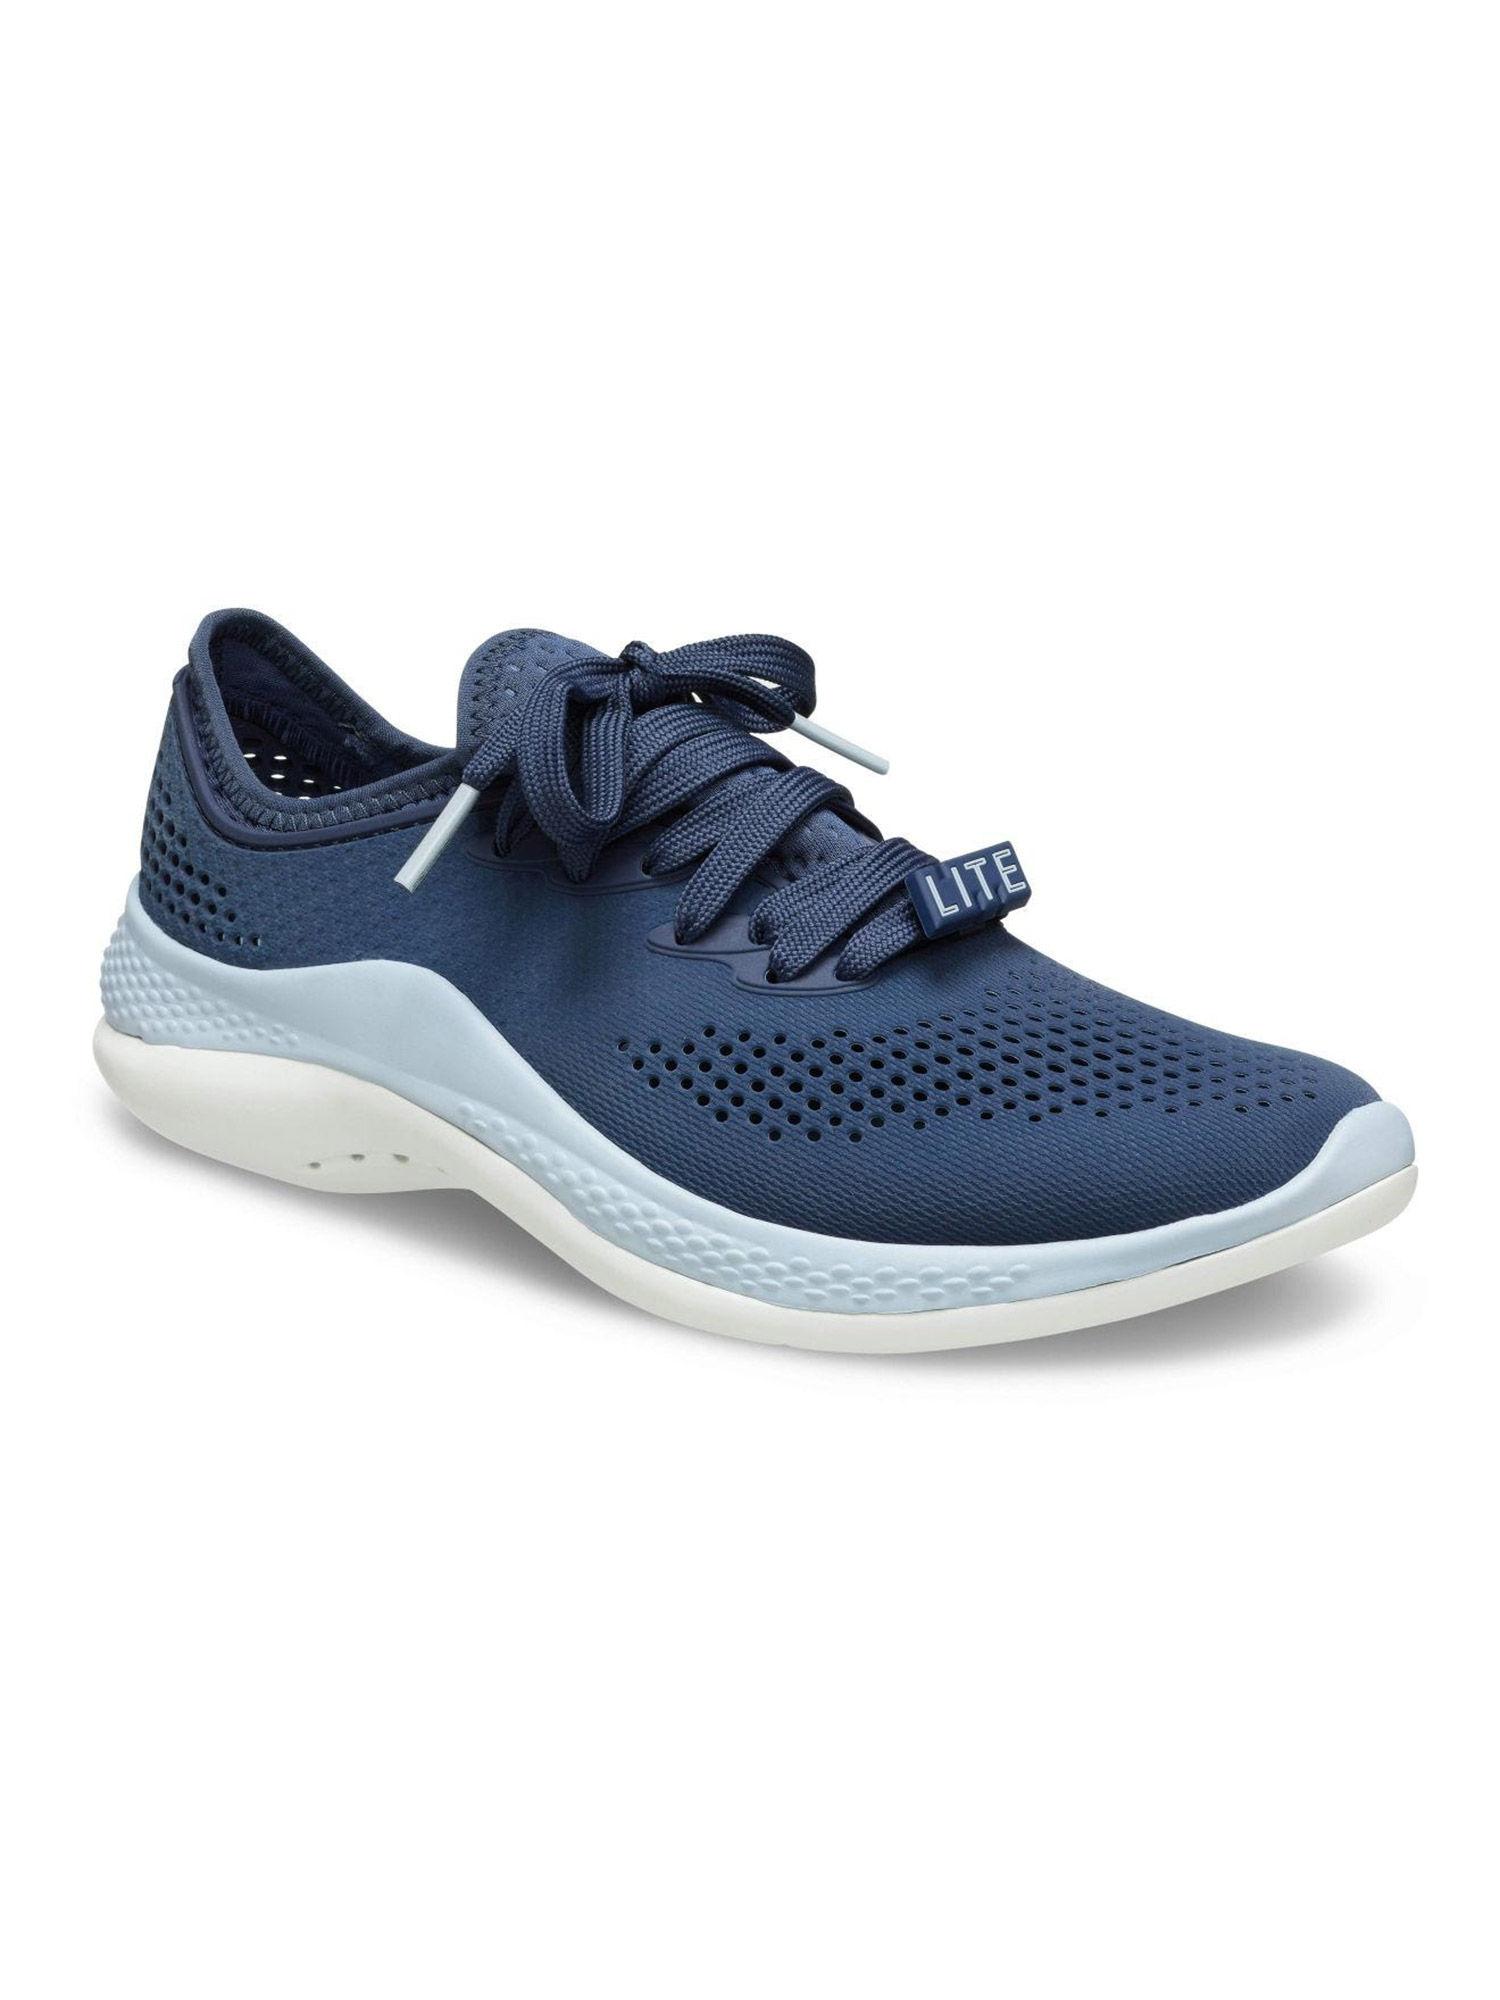 literide navy blue casual shoes